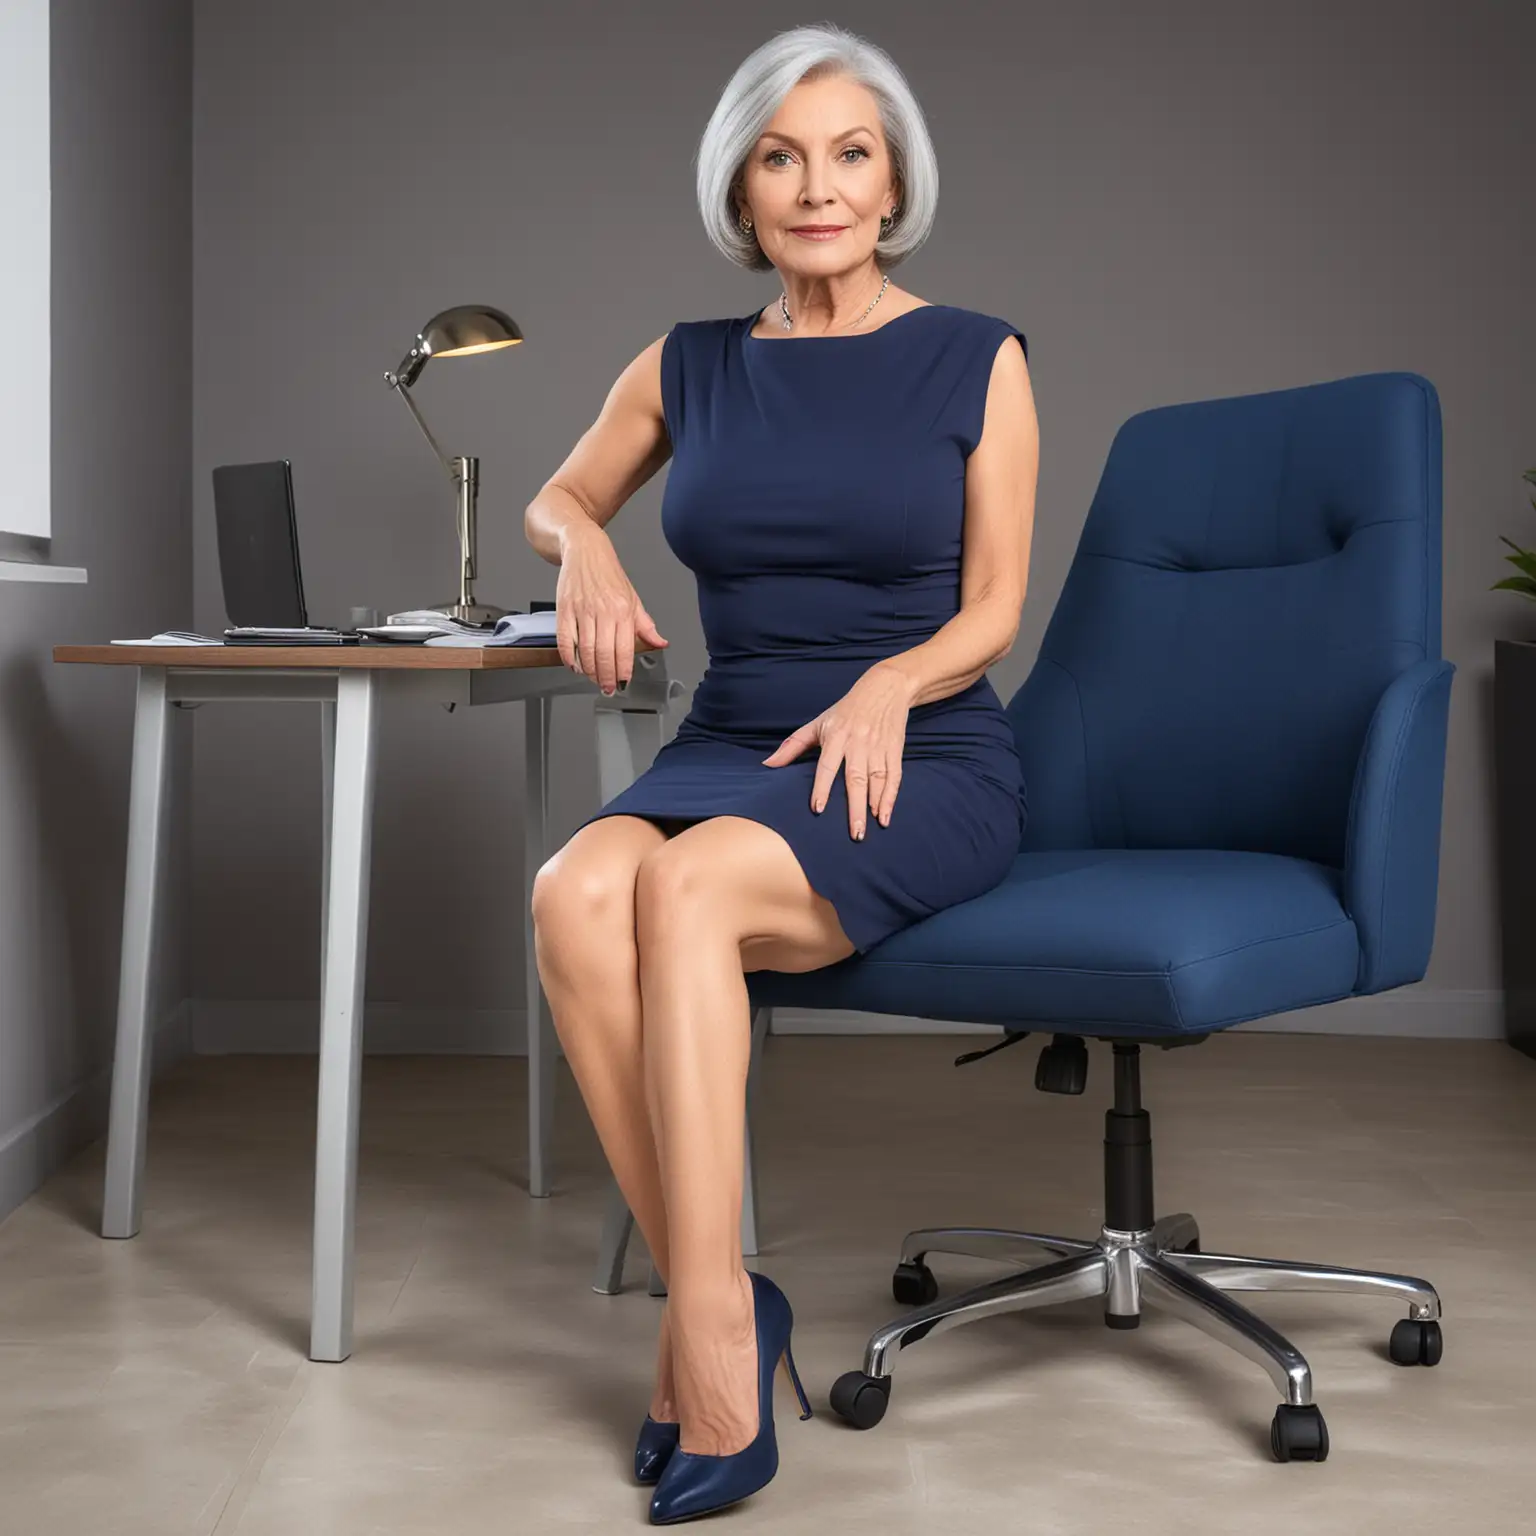 Elegant Mature Woman in Navy Blue Dress Posing in Office Chair